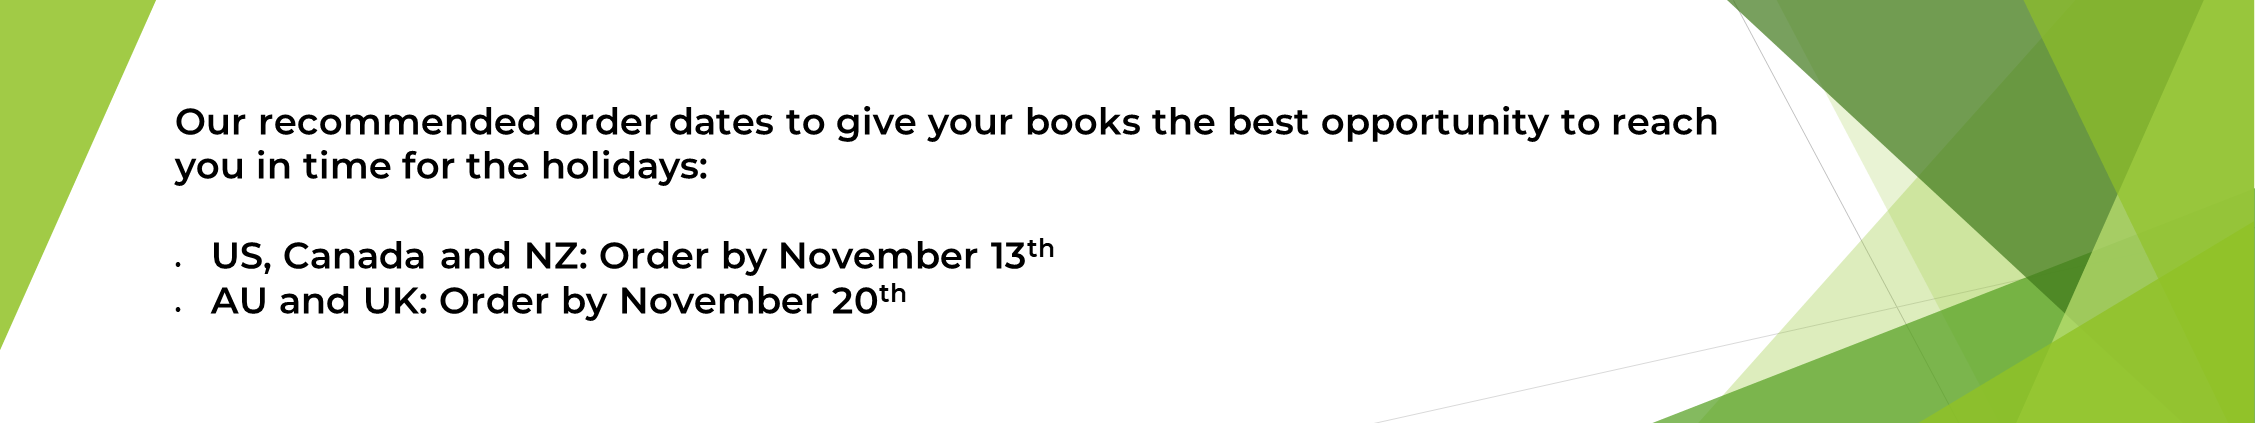 Our recommended order dates to give your books the best opportunity to reach you in time for the holidays:  US, Canada and NZ: Order by November 13th  AU and UK: Order by November 20th 